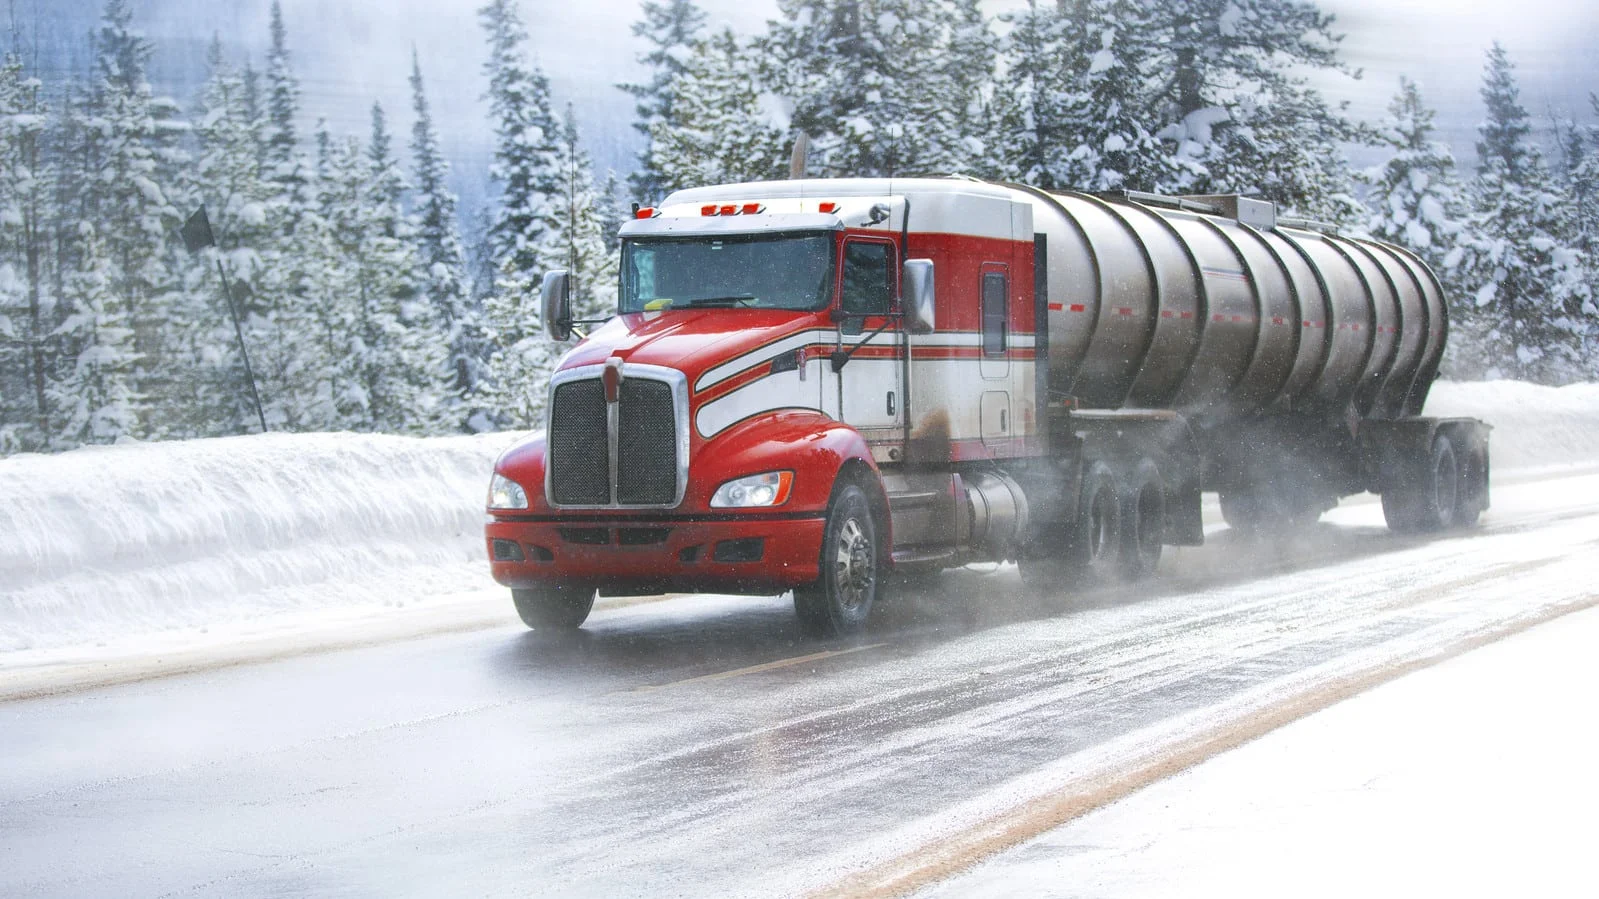 18-wheeler Truck Driving In The Snow